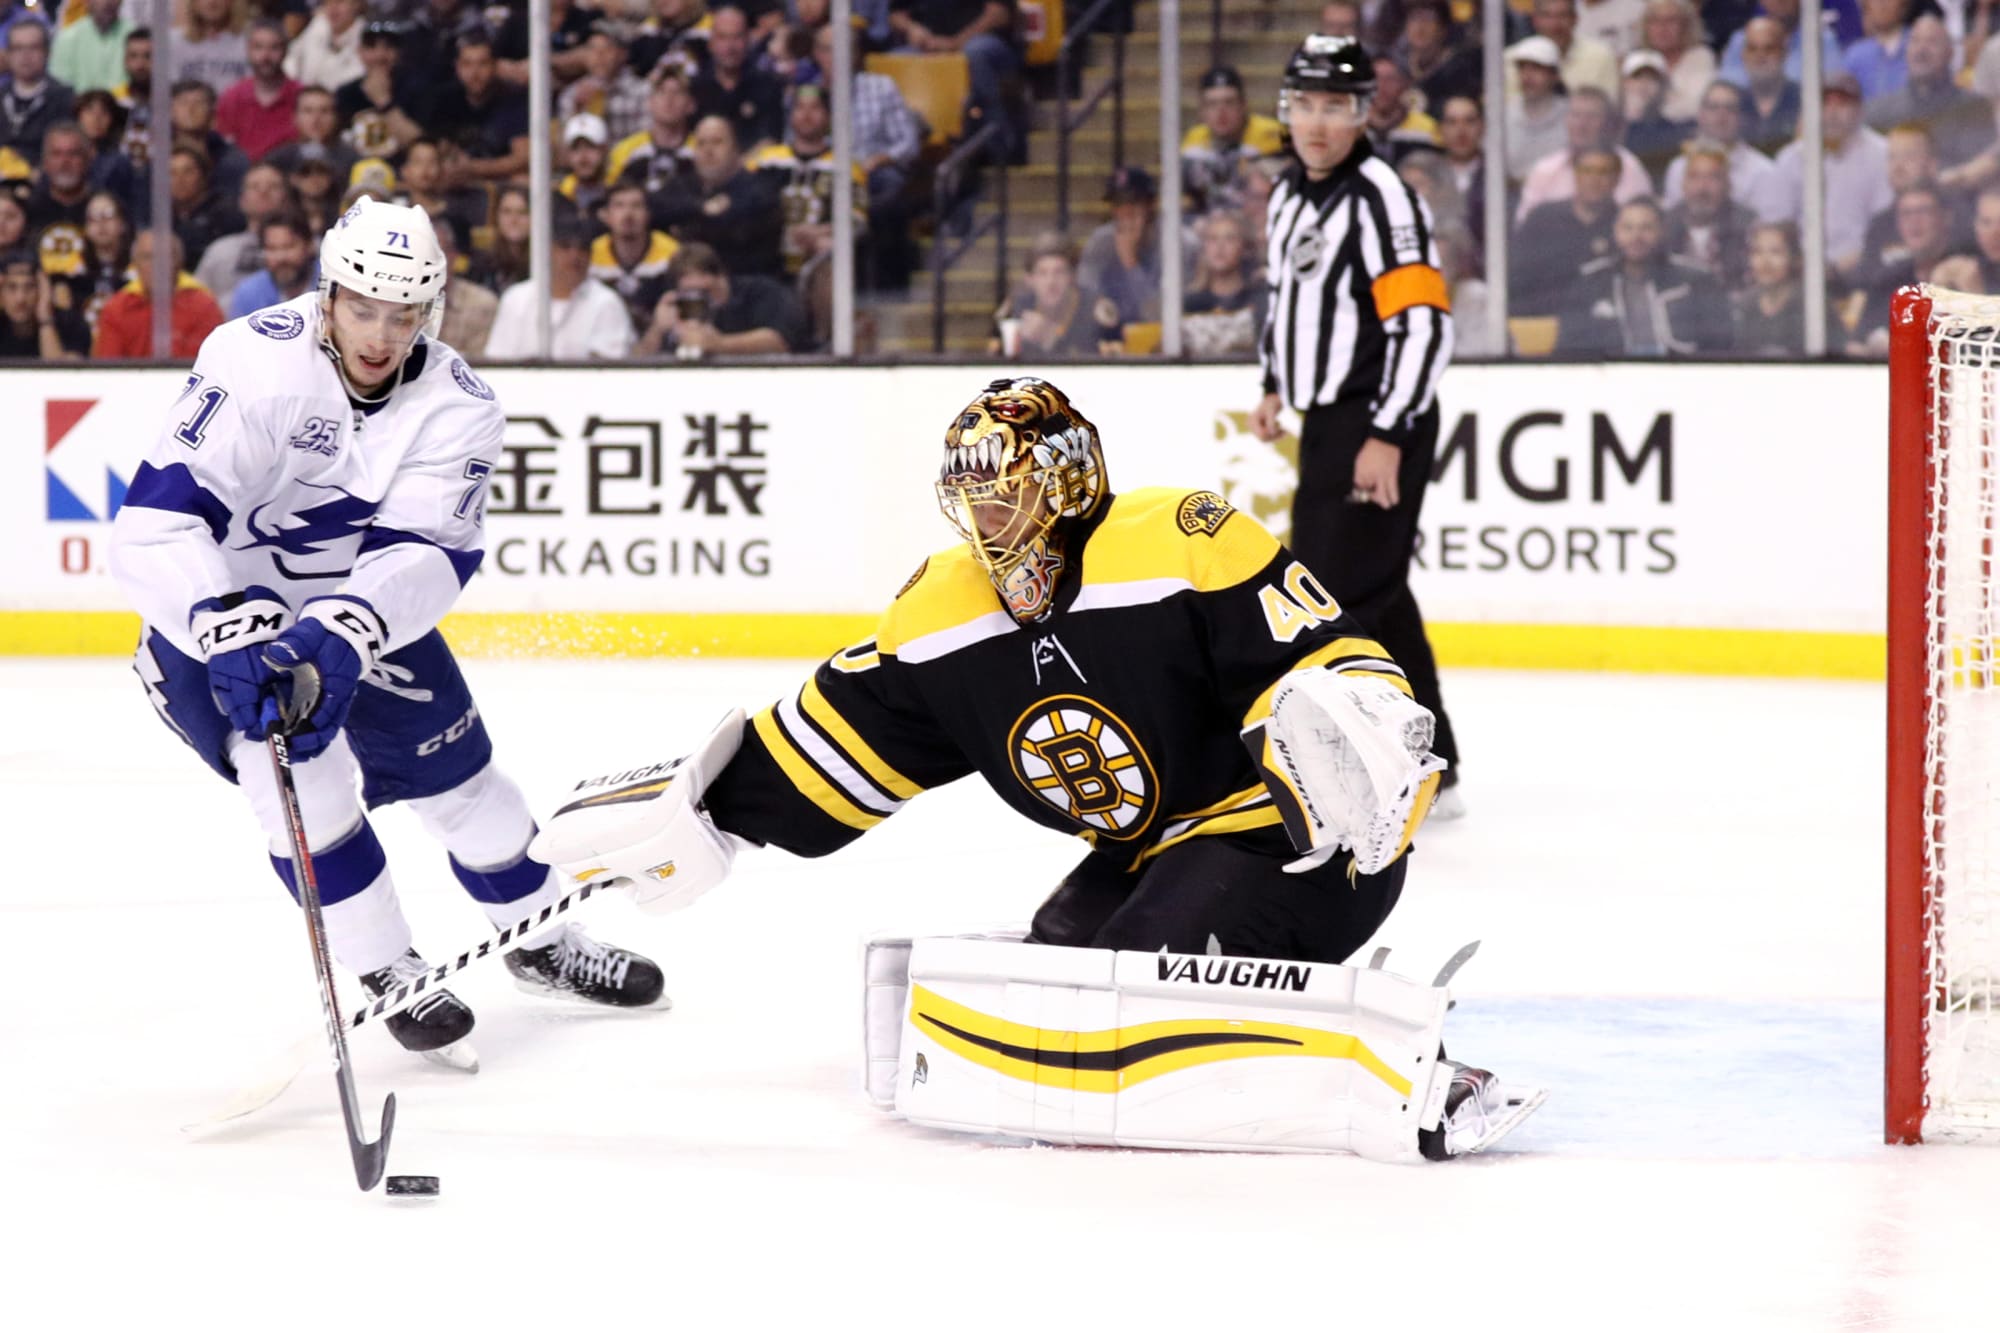 Boston Bruins The B's continue to disappoint in game 3 loss